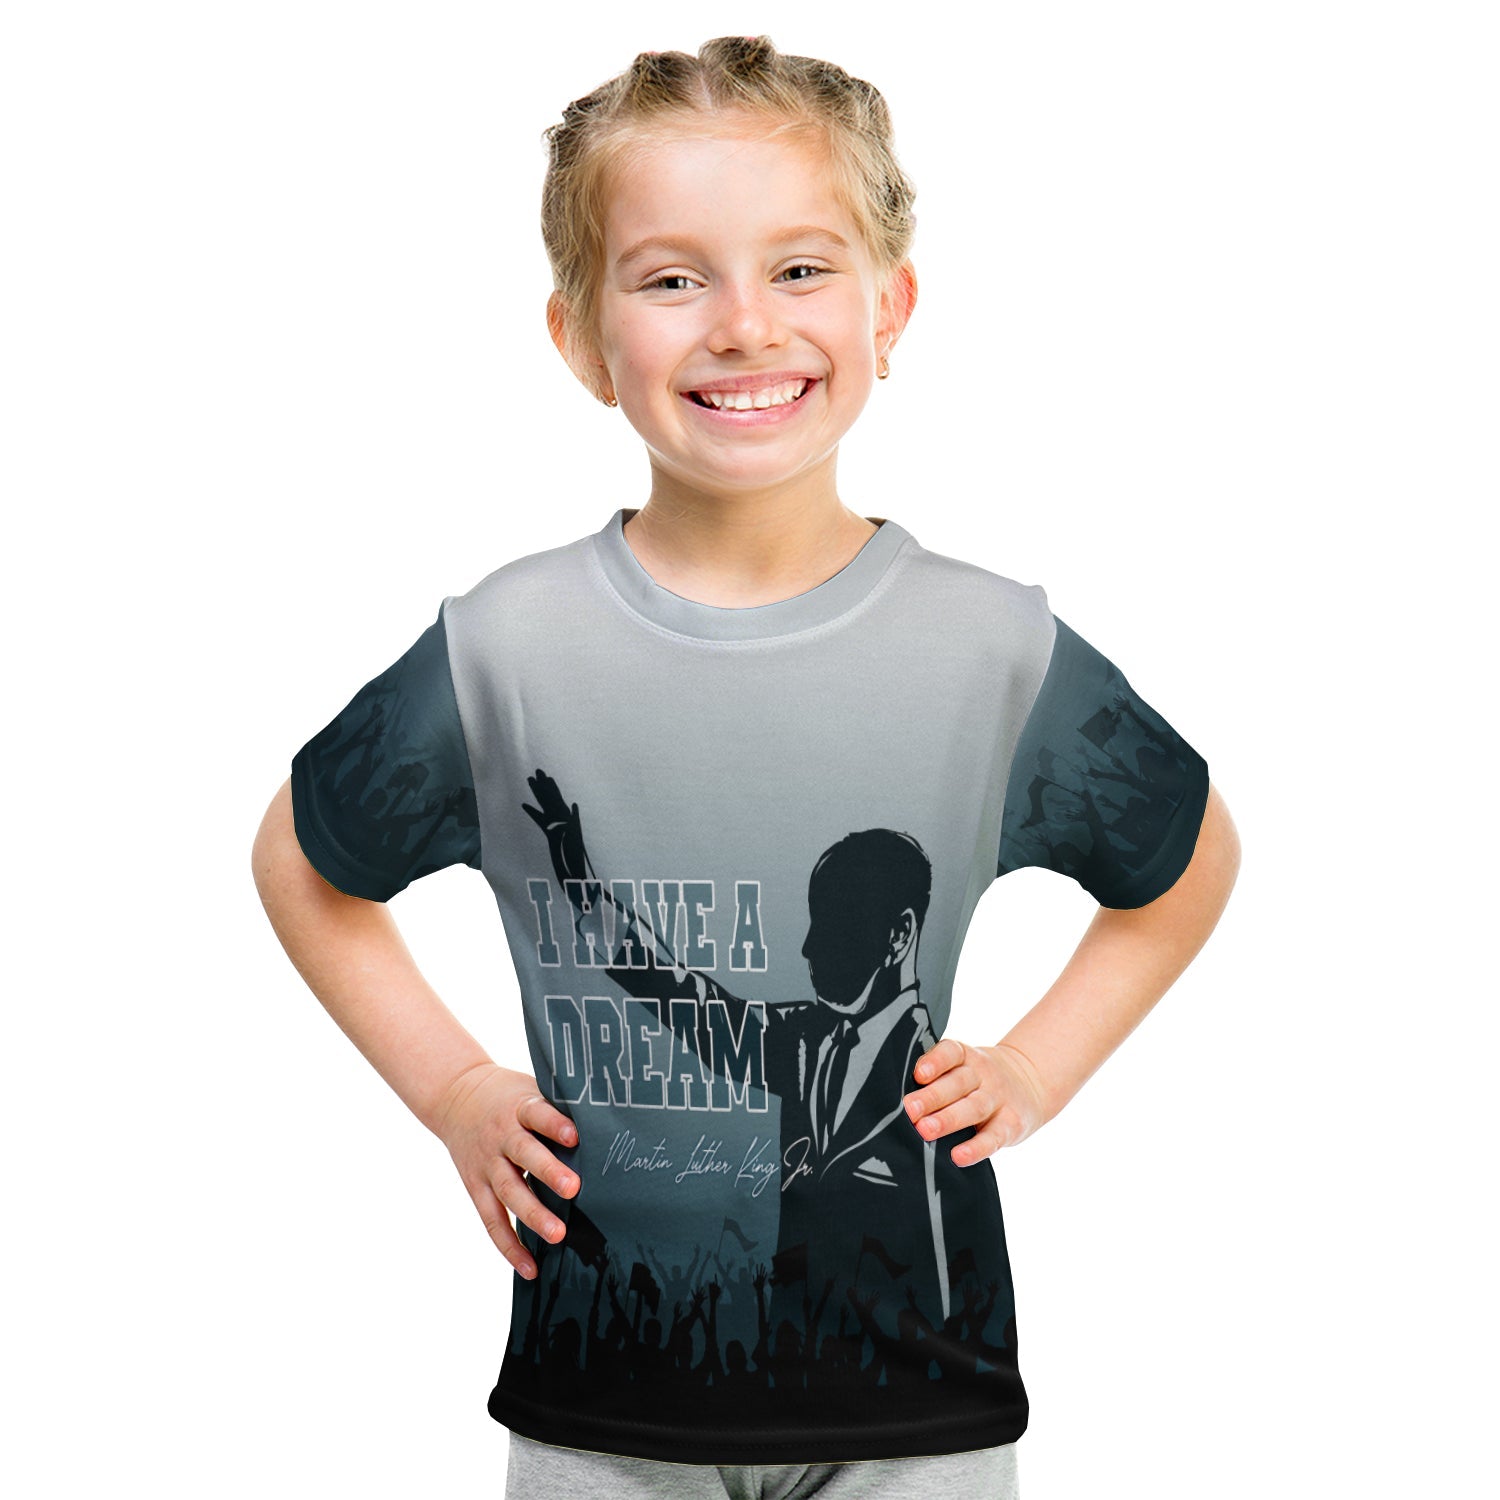 mlk-day-t-shirt-kid-i-have-a-dream